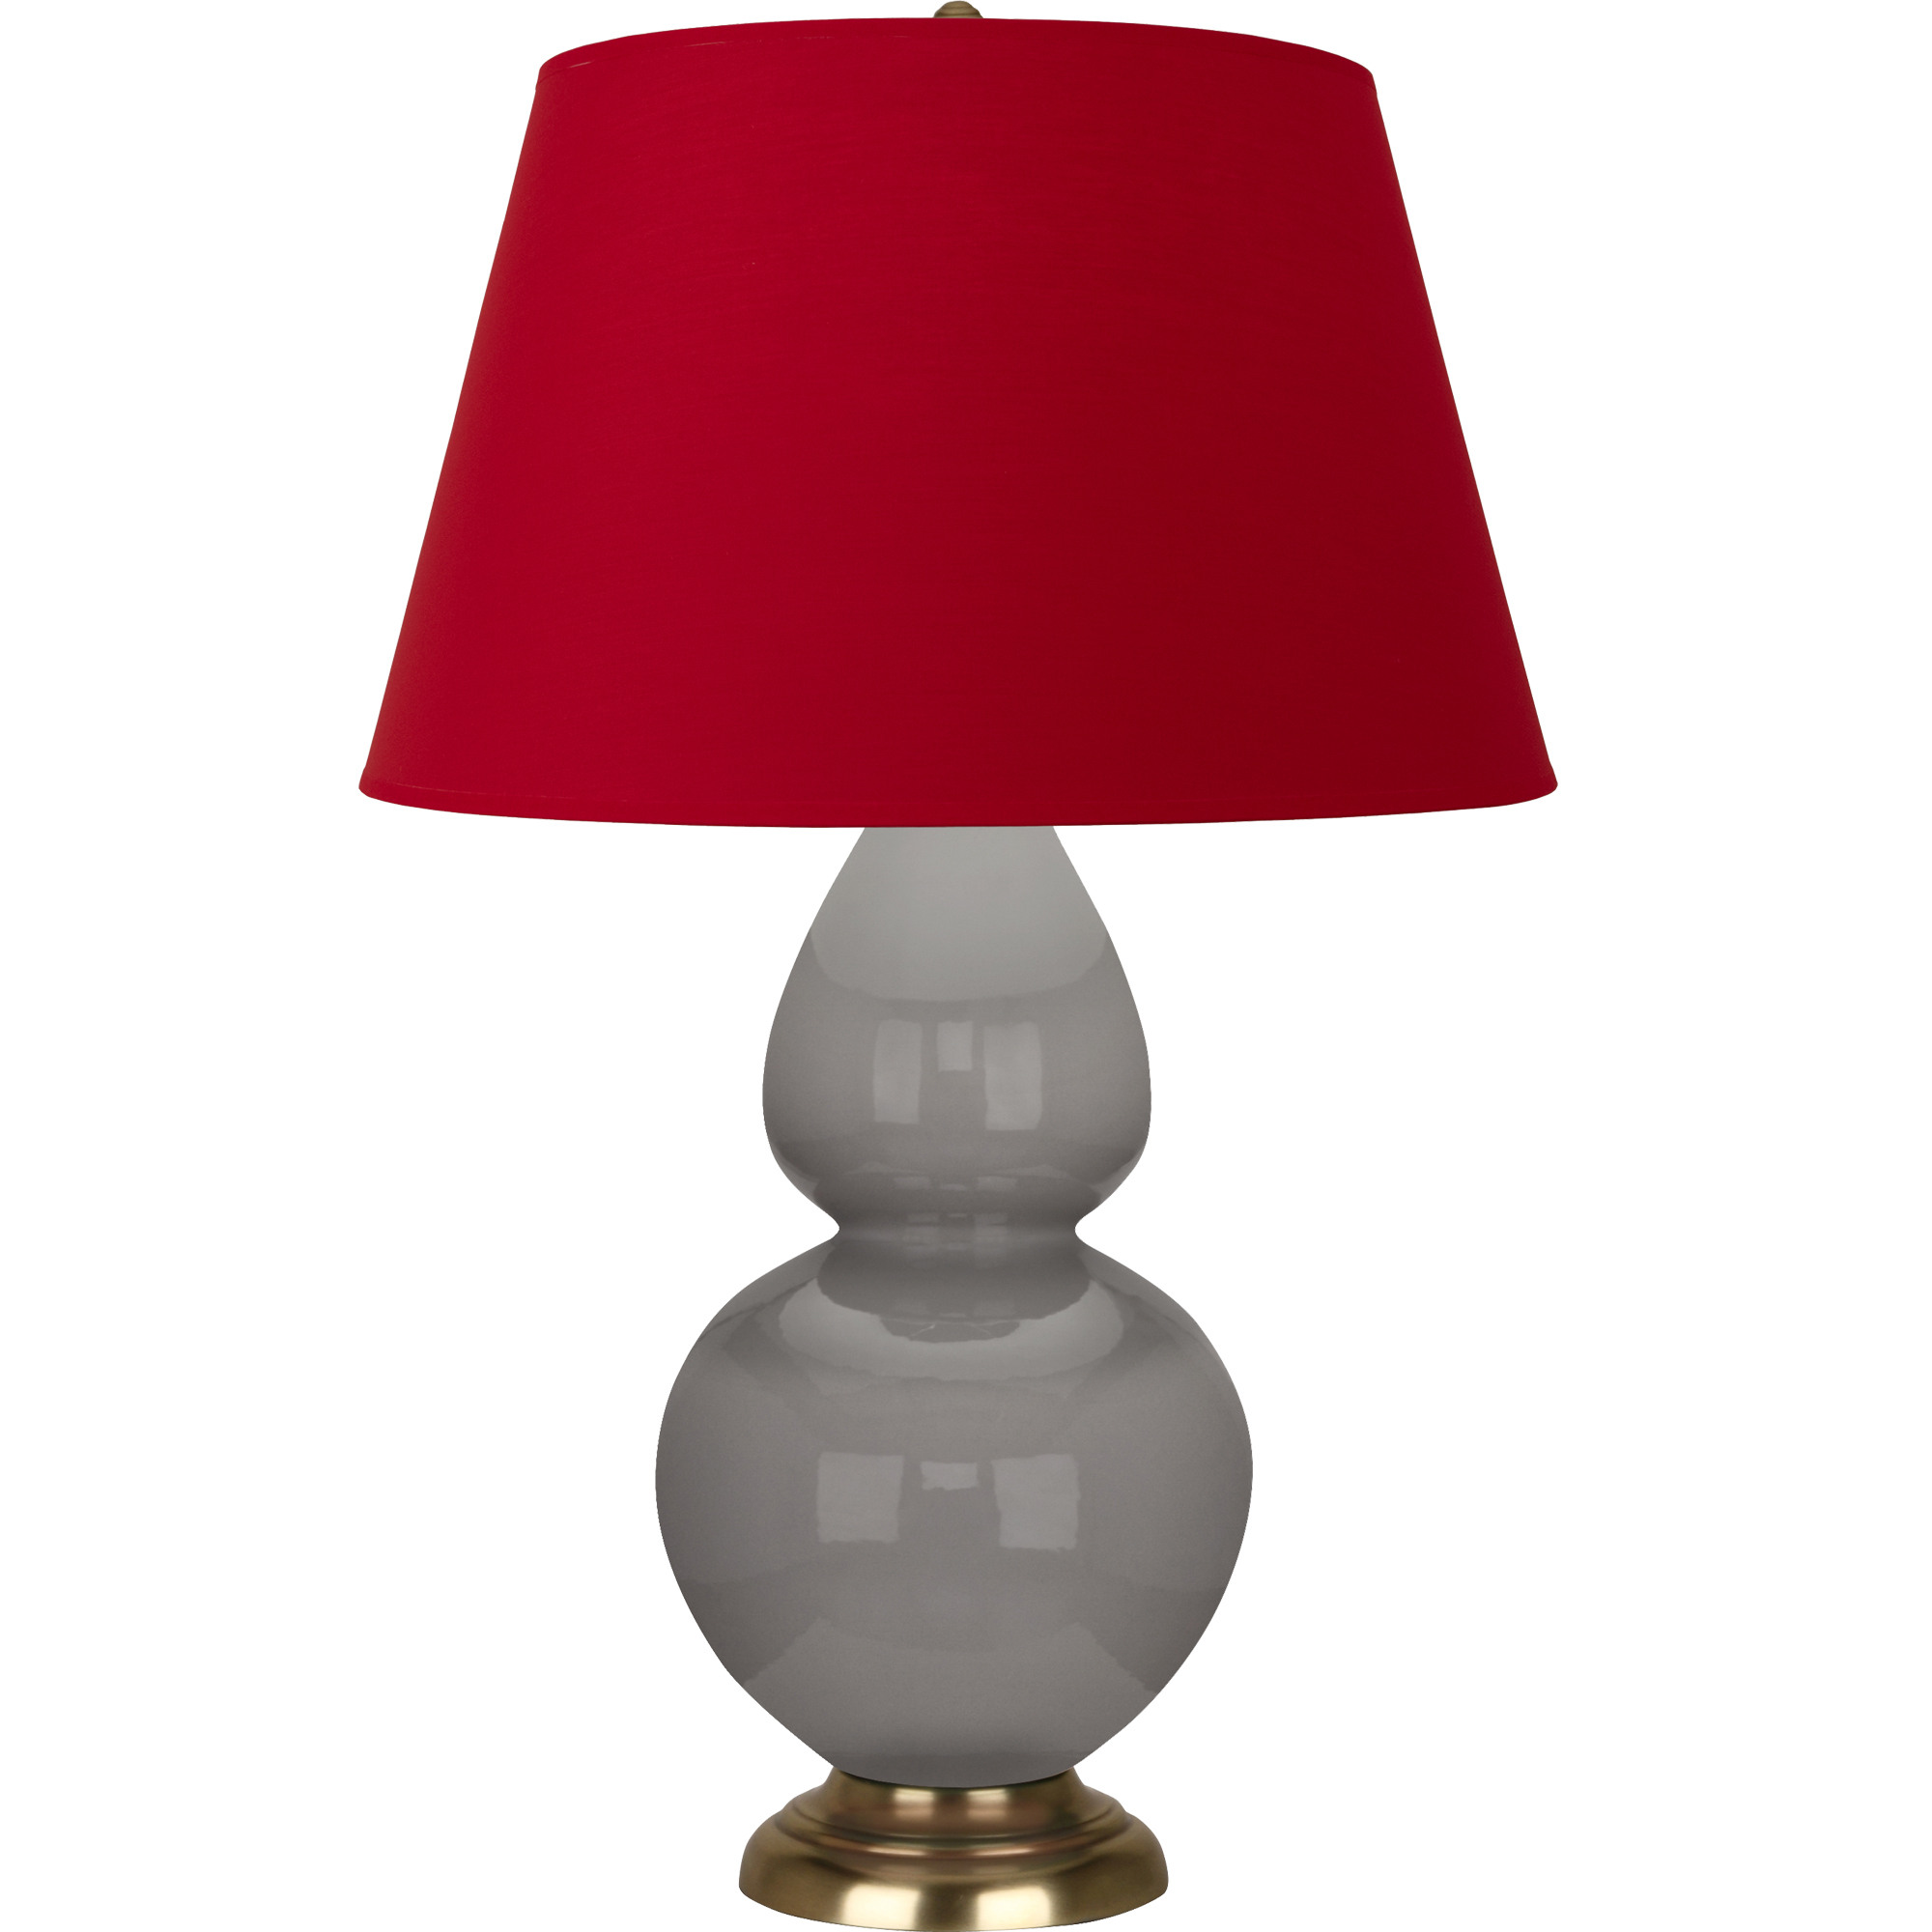 Double Gourd Table Lamp Style #1748R